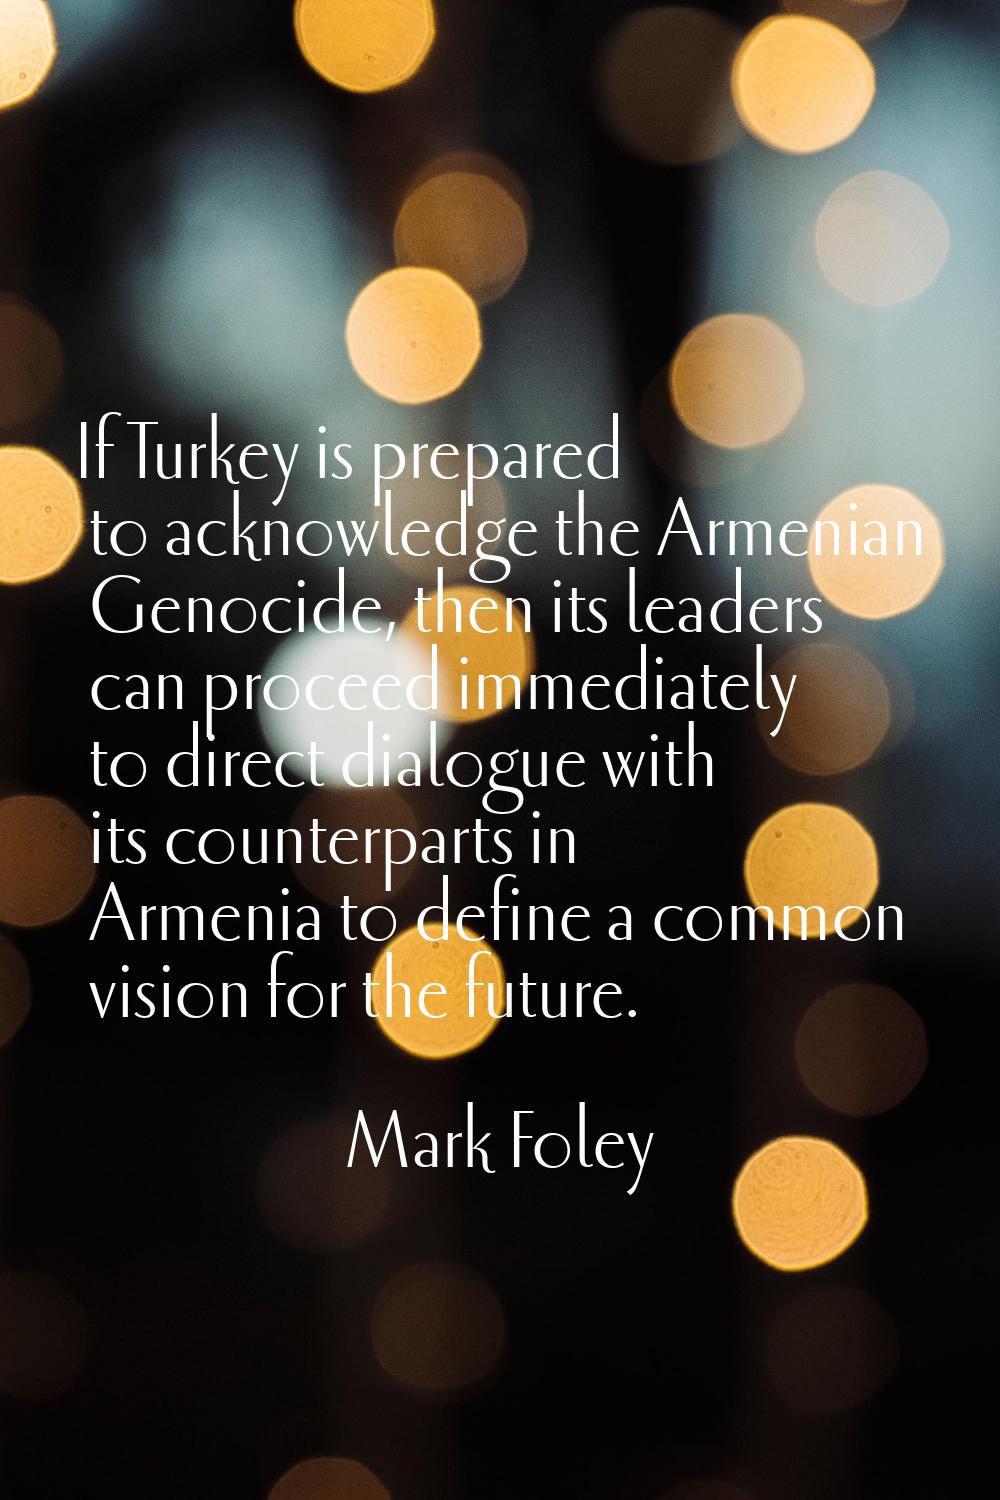 If Turkey is prepared to acknowledge the Armenian Genocide, then its leaders can proceed immediatel